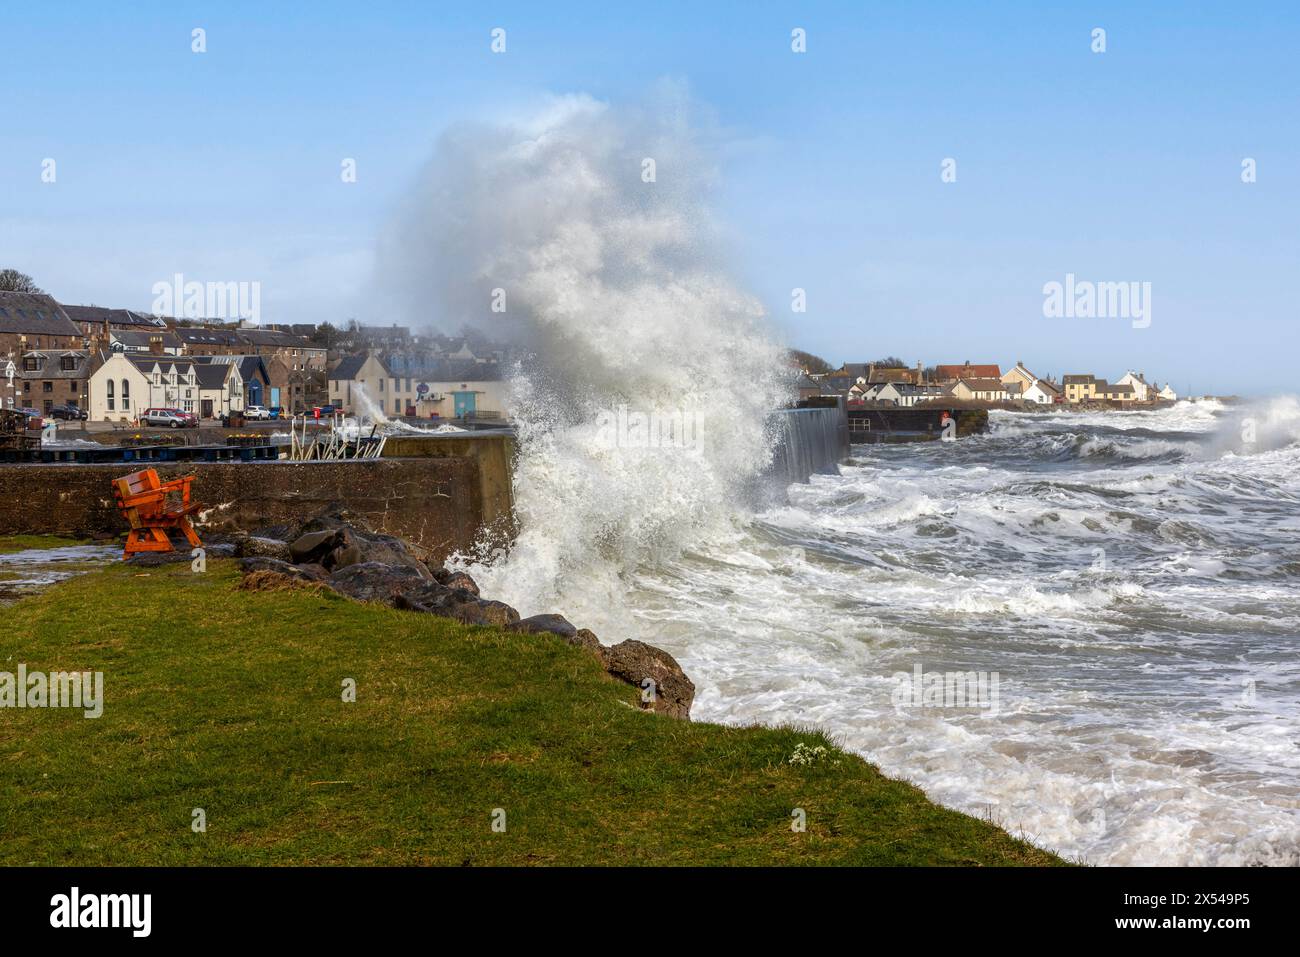 The fishing village of Johnshaven, situated in Aberdeenshire, Scotland, during a stormy day, with waves crashing against its harbour walls. Stock Photo